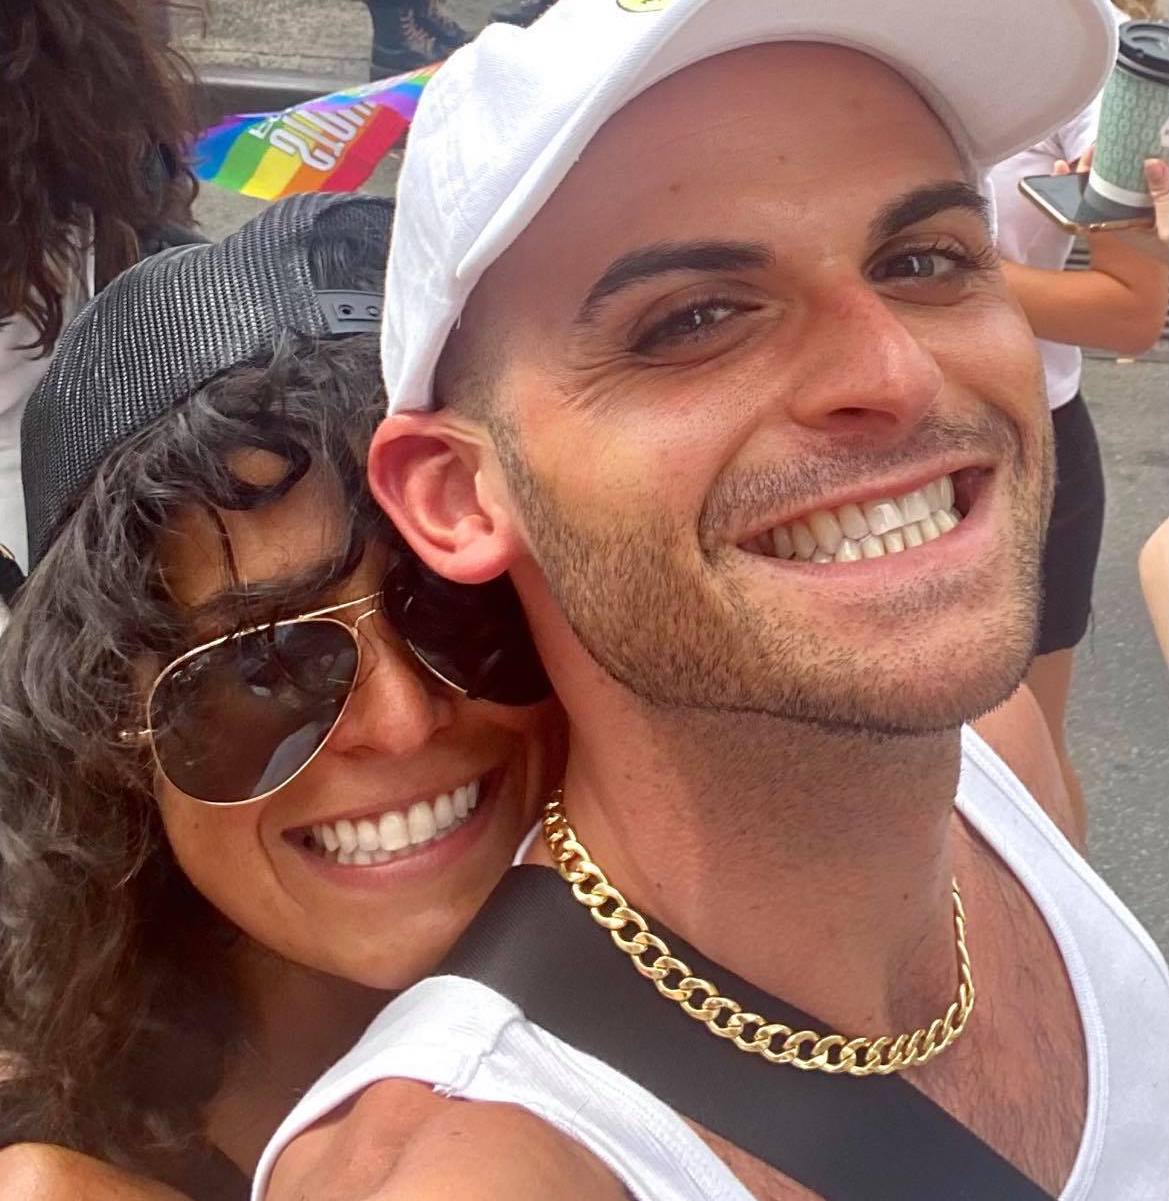 SOLUtion Medical founder Julia Anthony (left) and her brother at Pride 2021.